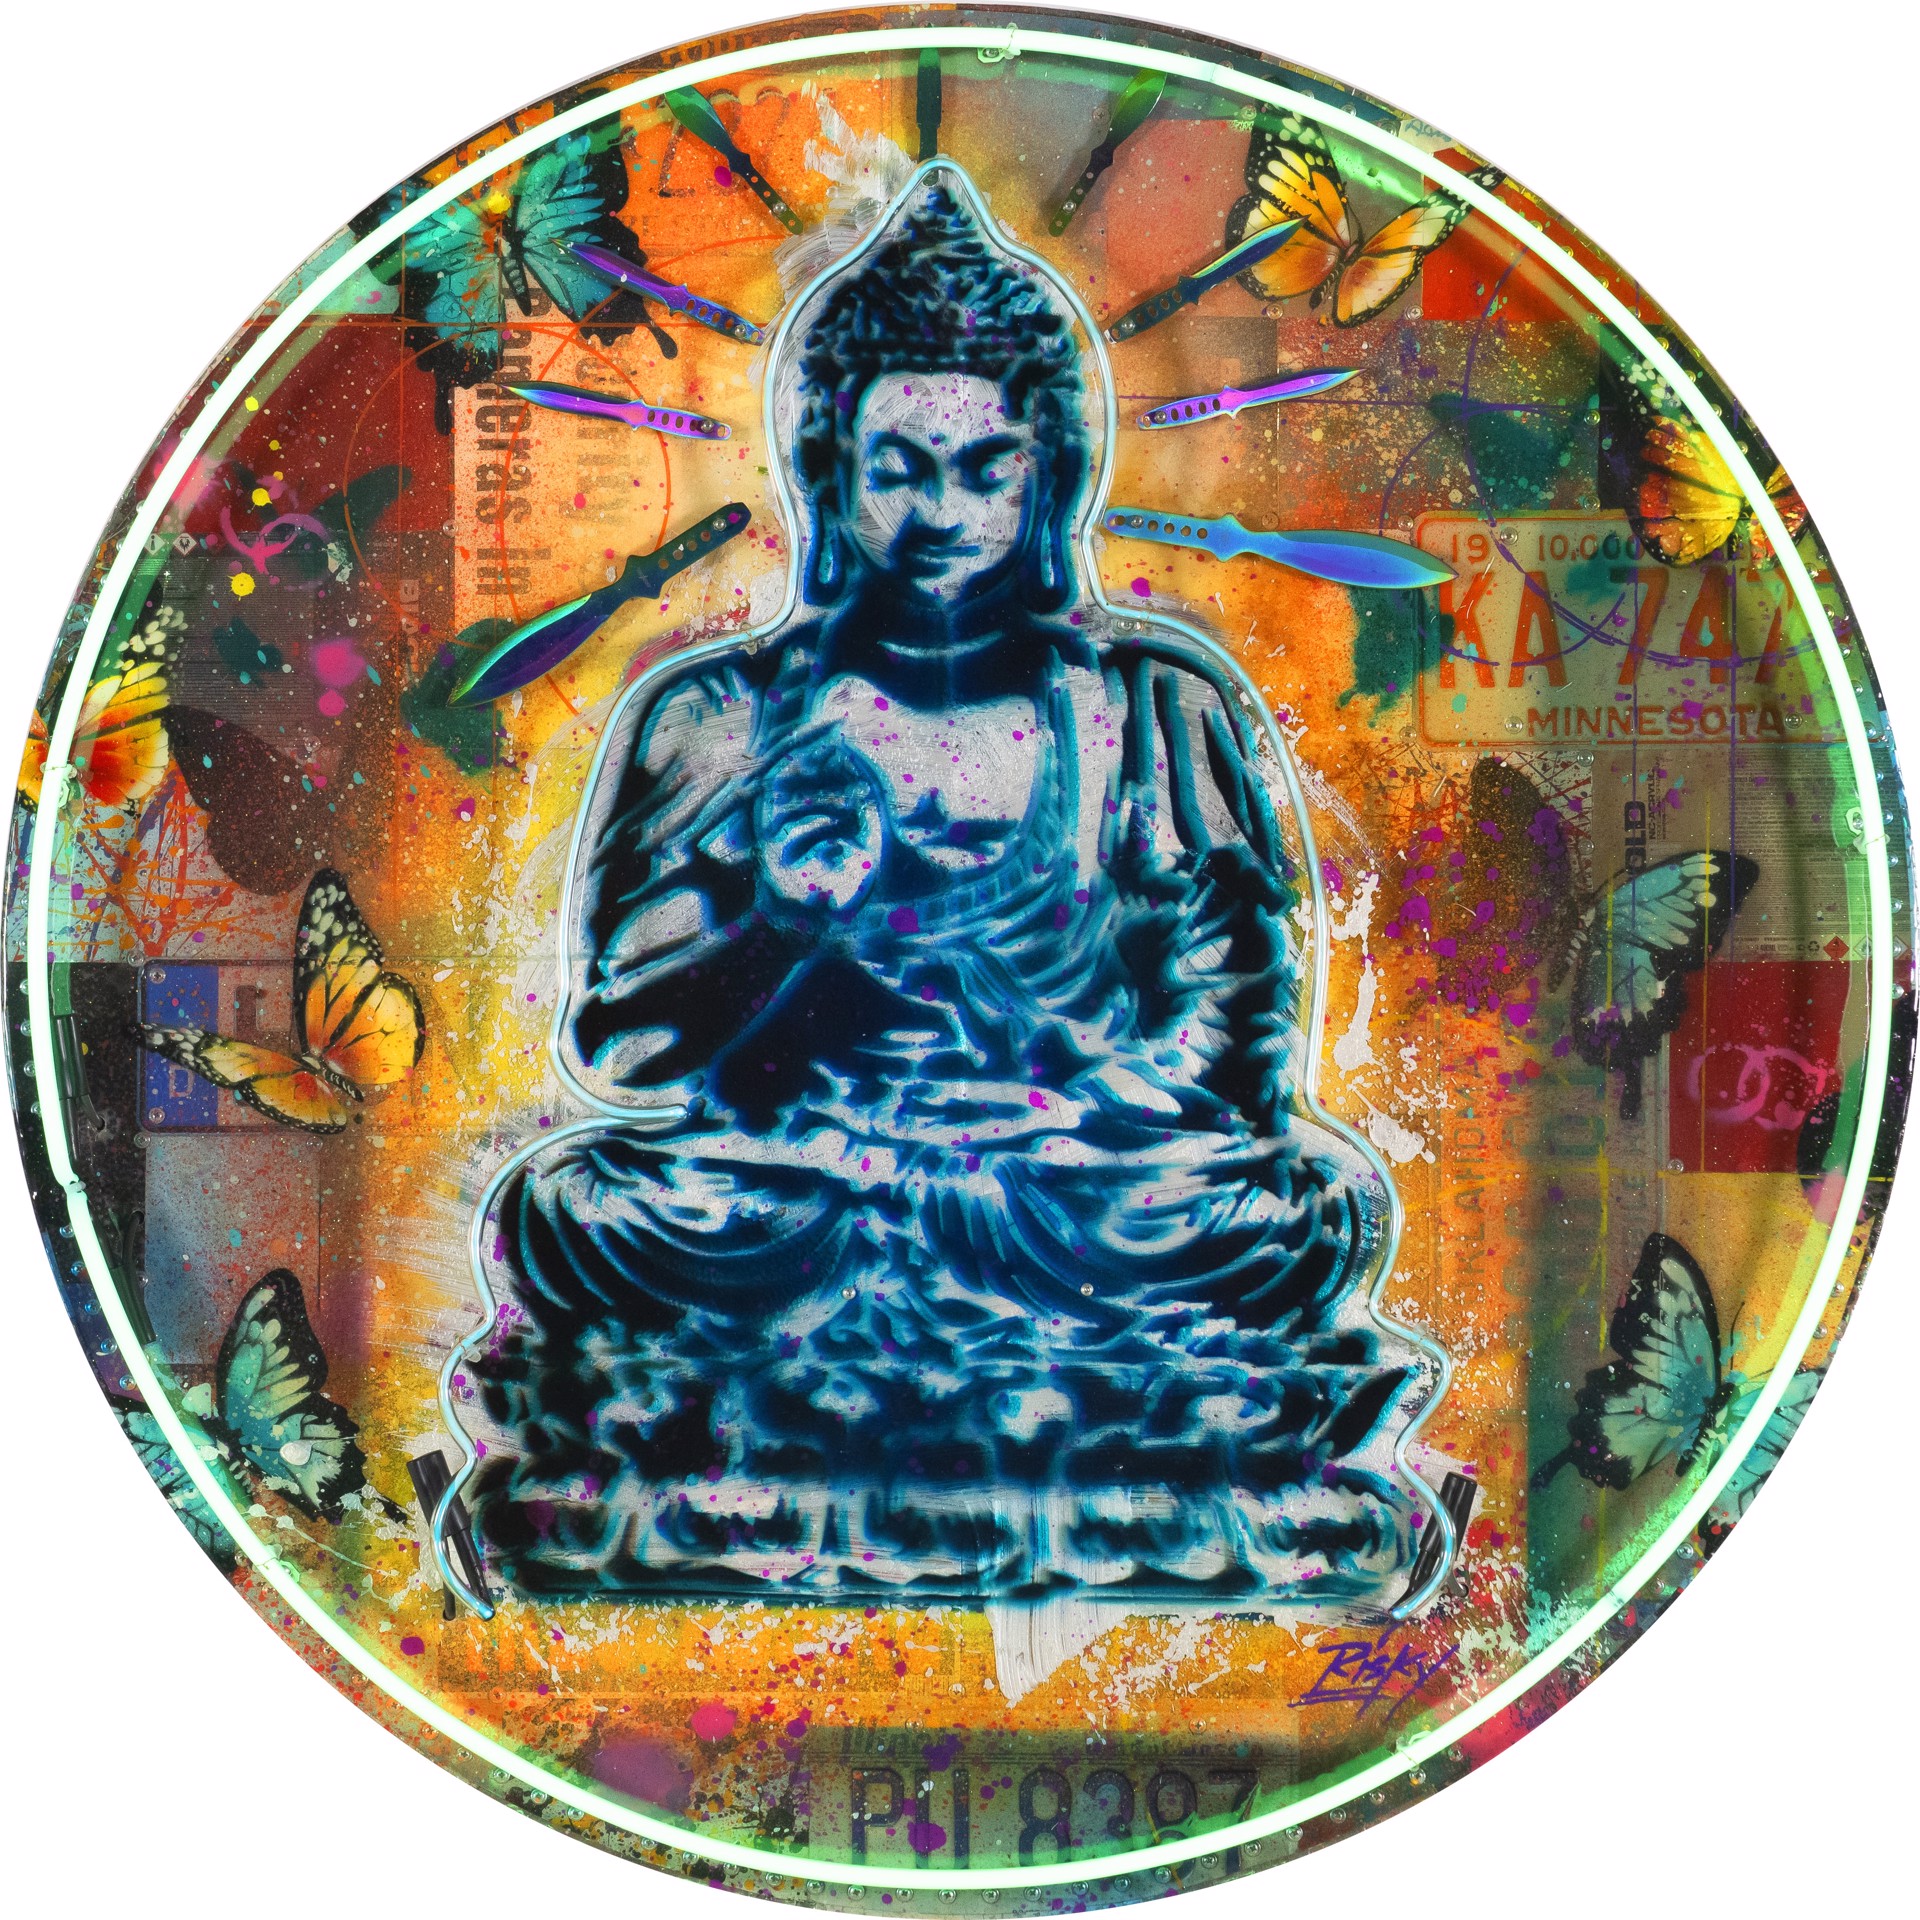 Peaceful Buddha (Neon) by Risk